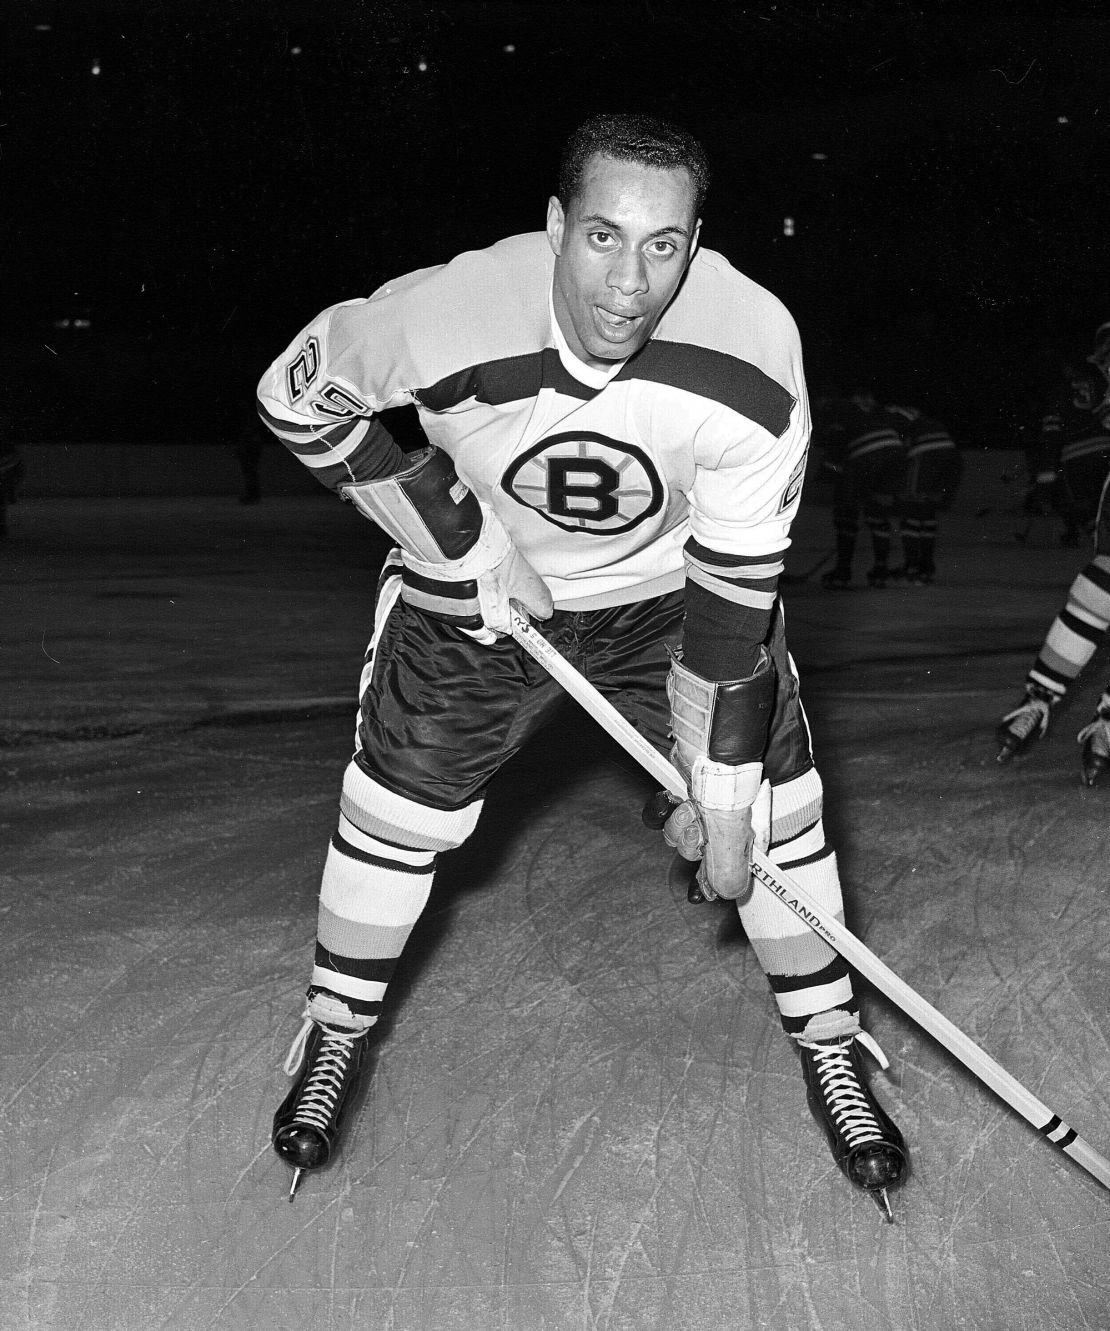 Boston Bruins player Willie O'Ree warms up before a game against the New York Rangers at New York's Madison Square Garden on November 23, 1960. 